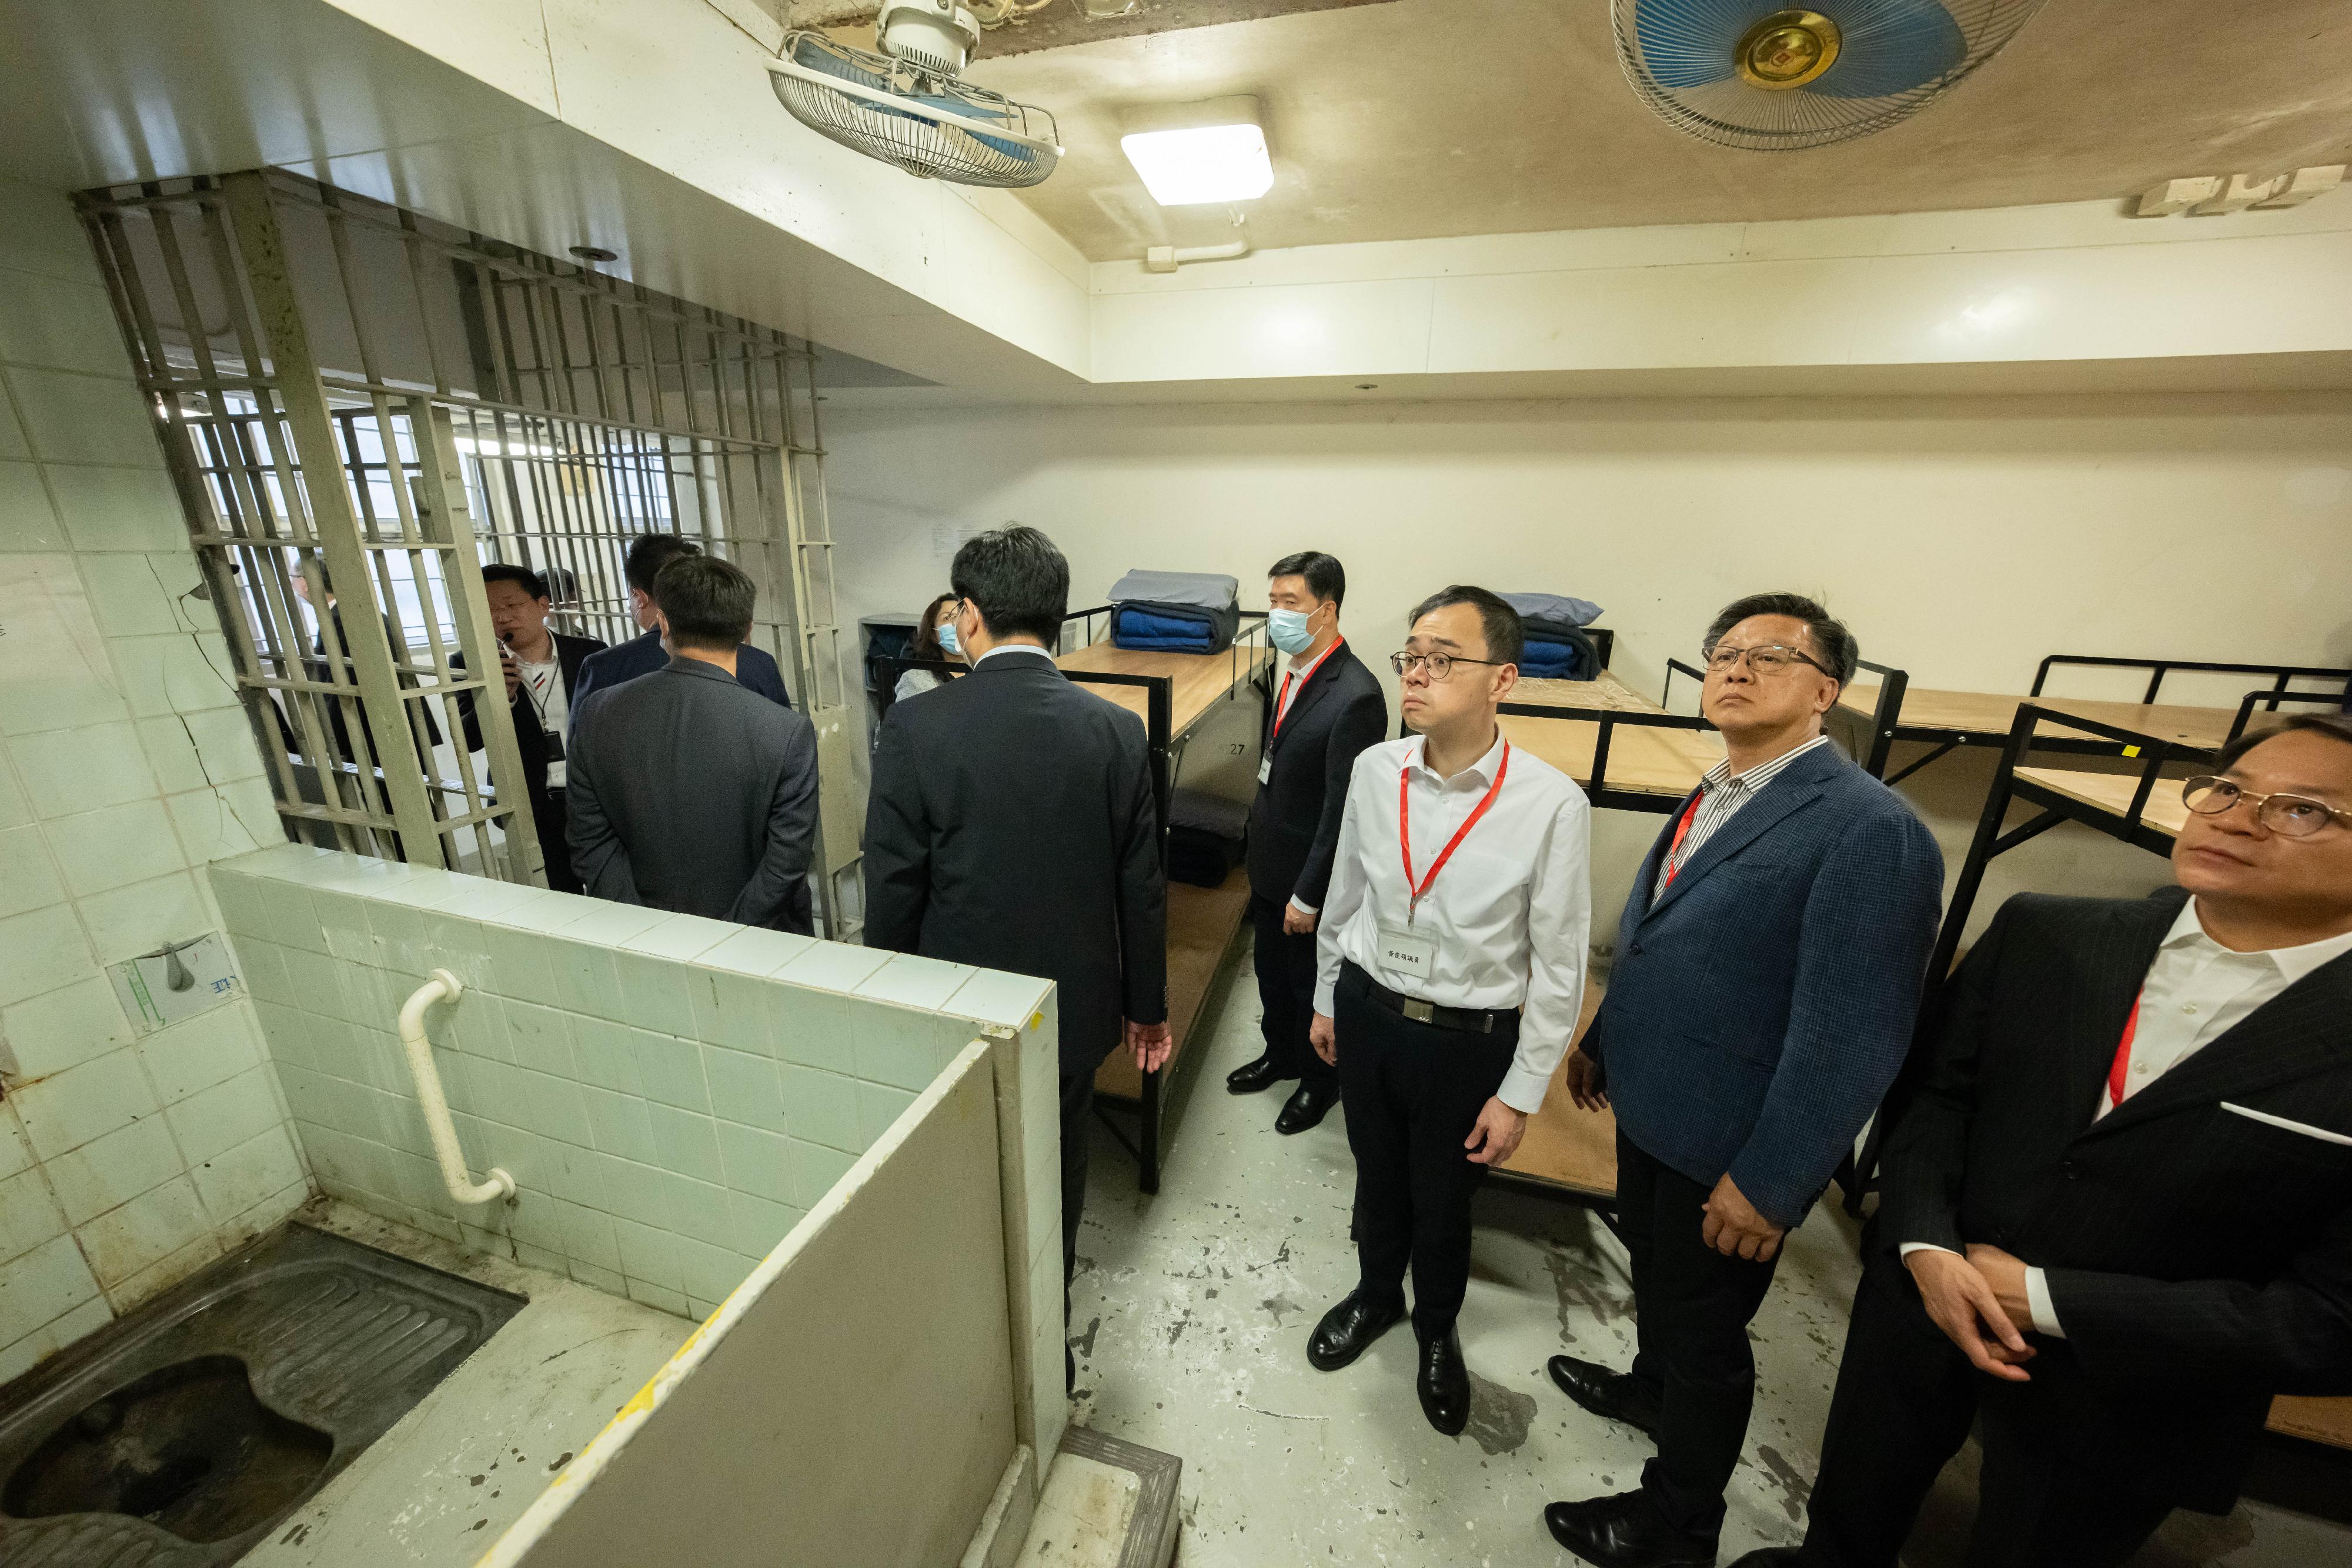 The Legislative Council (LegCo) Panel on Security visits Lai Chi Kok Reception Centre (LCKRC) today (December 12). Photo shows LegCo Members visiting the facilities in LCKRC.